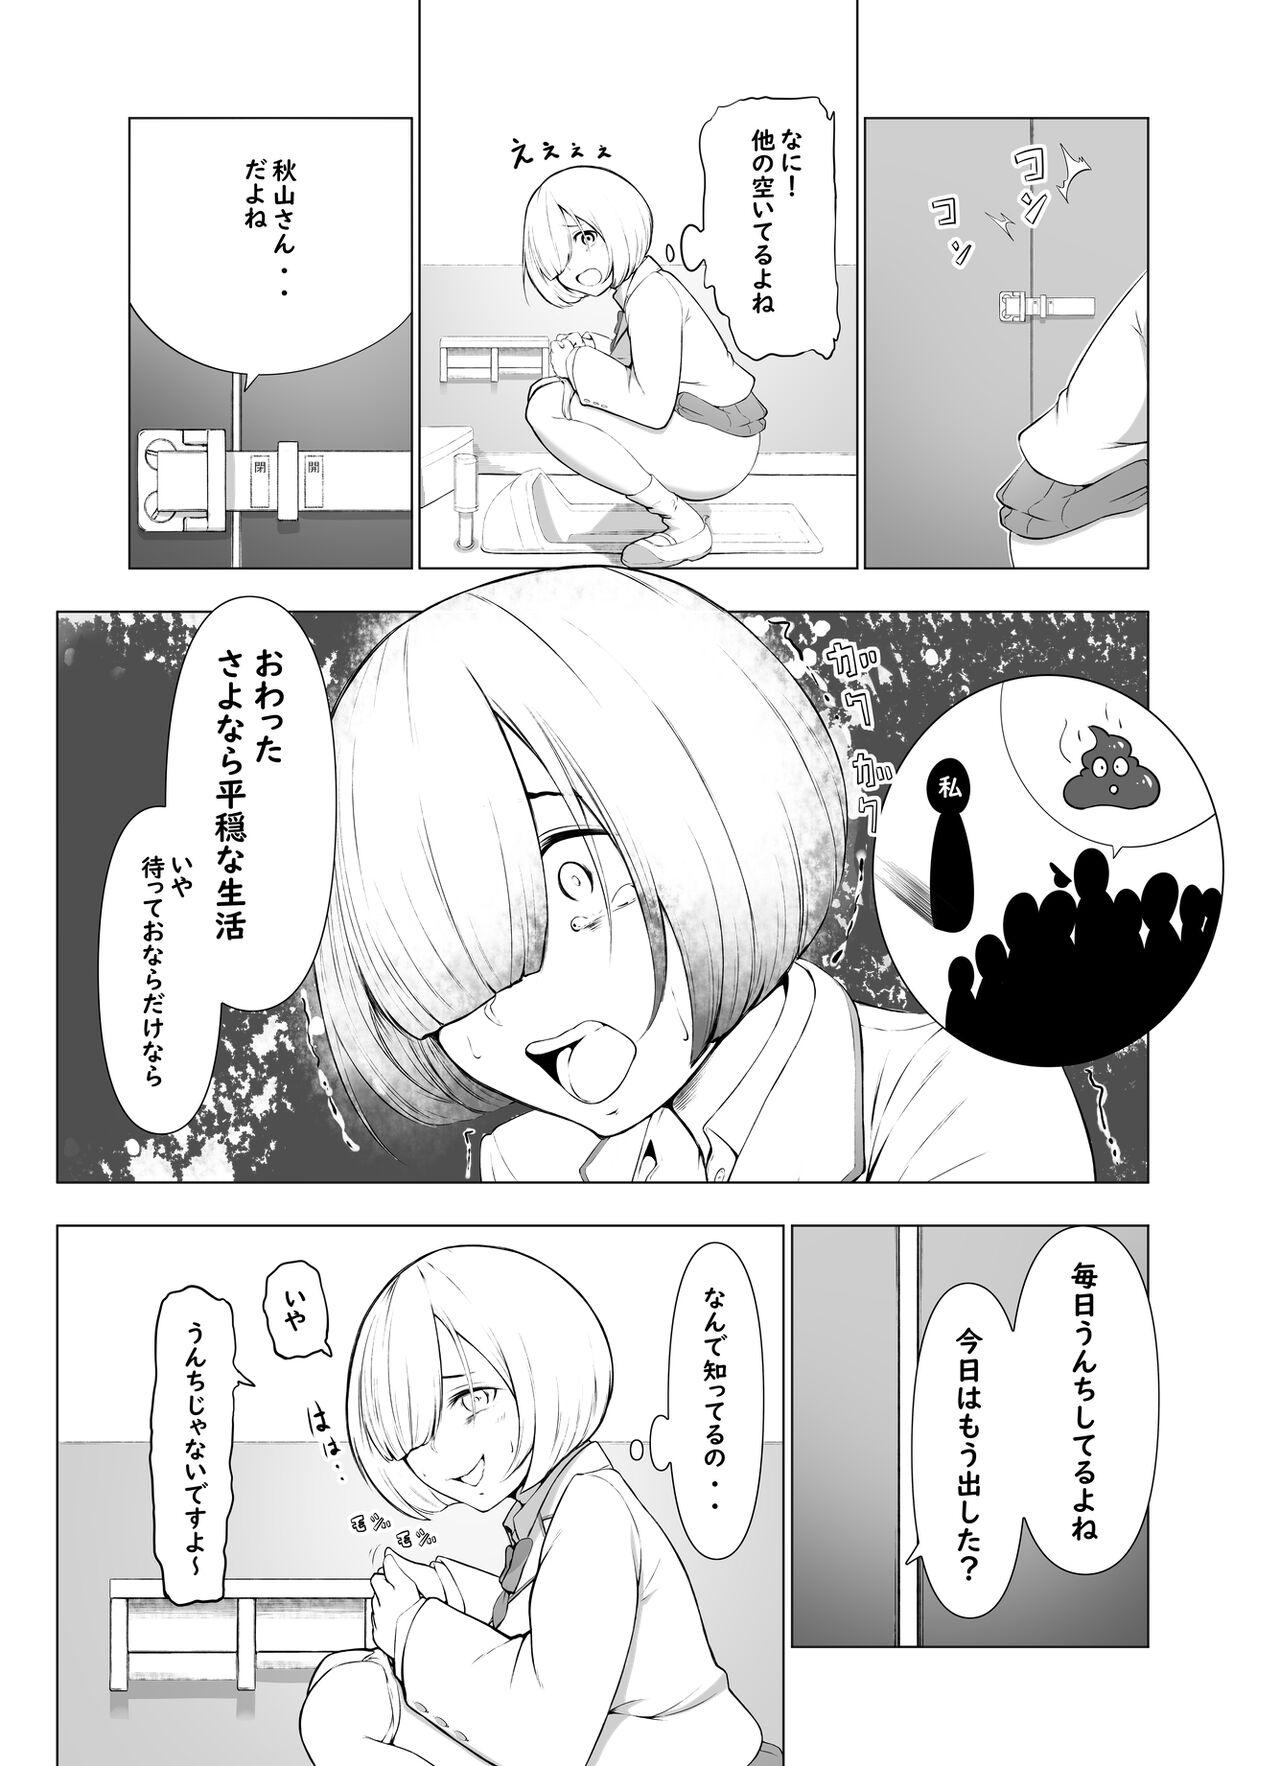 Leather 【脱糞漫画】トイレの音【８P】 Cruising - Page 4